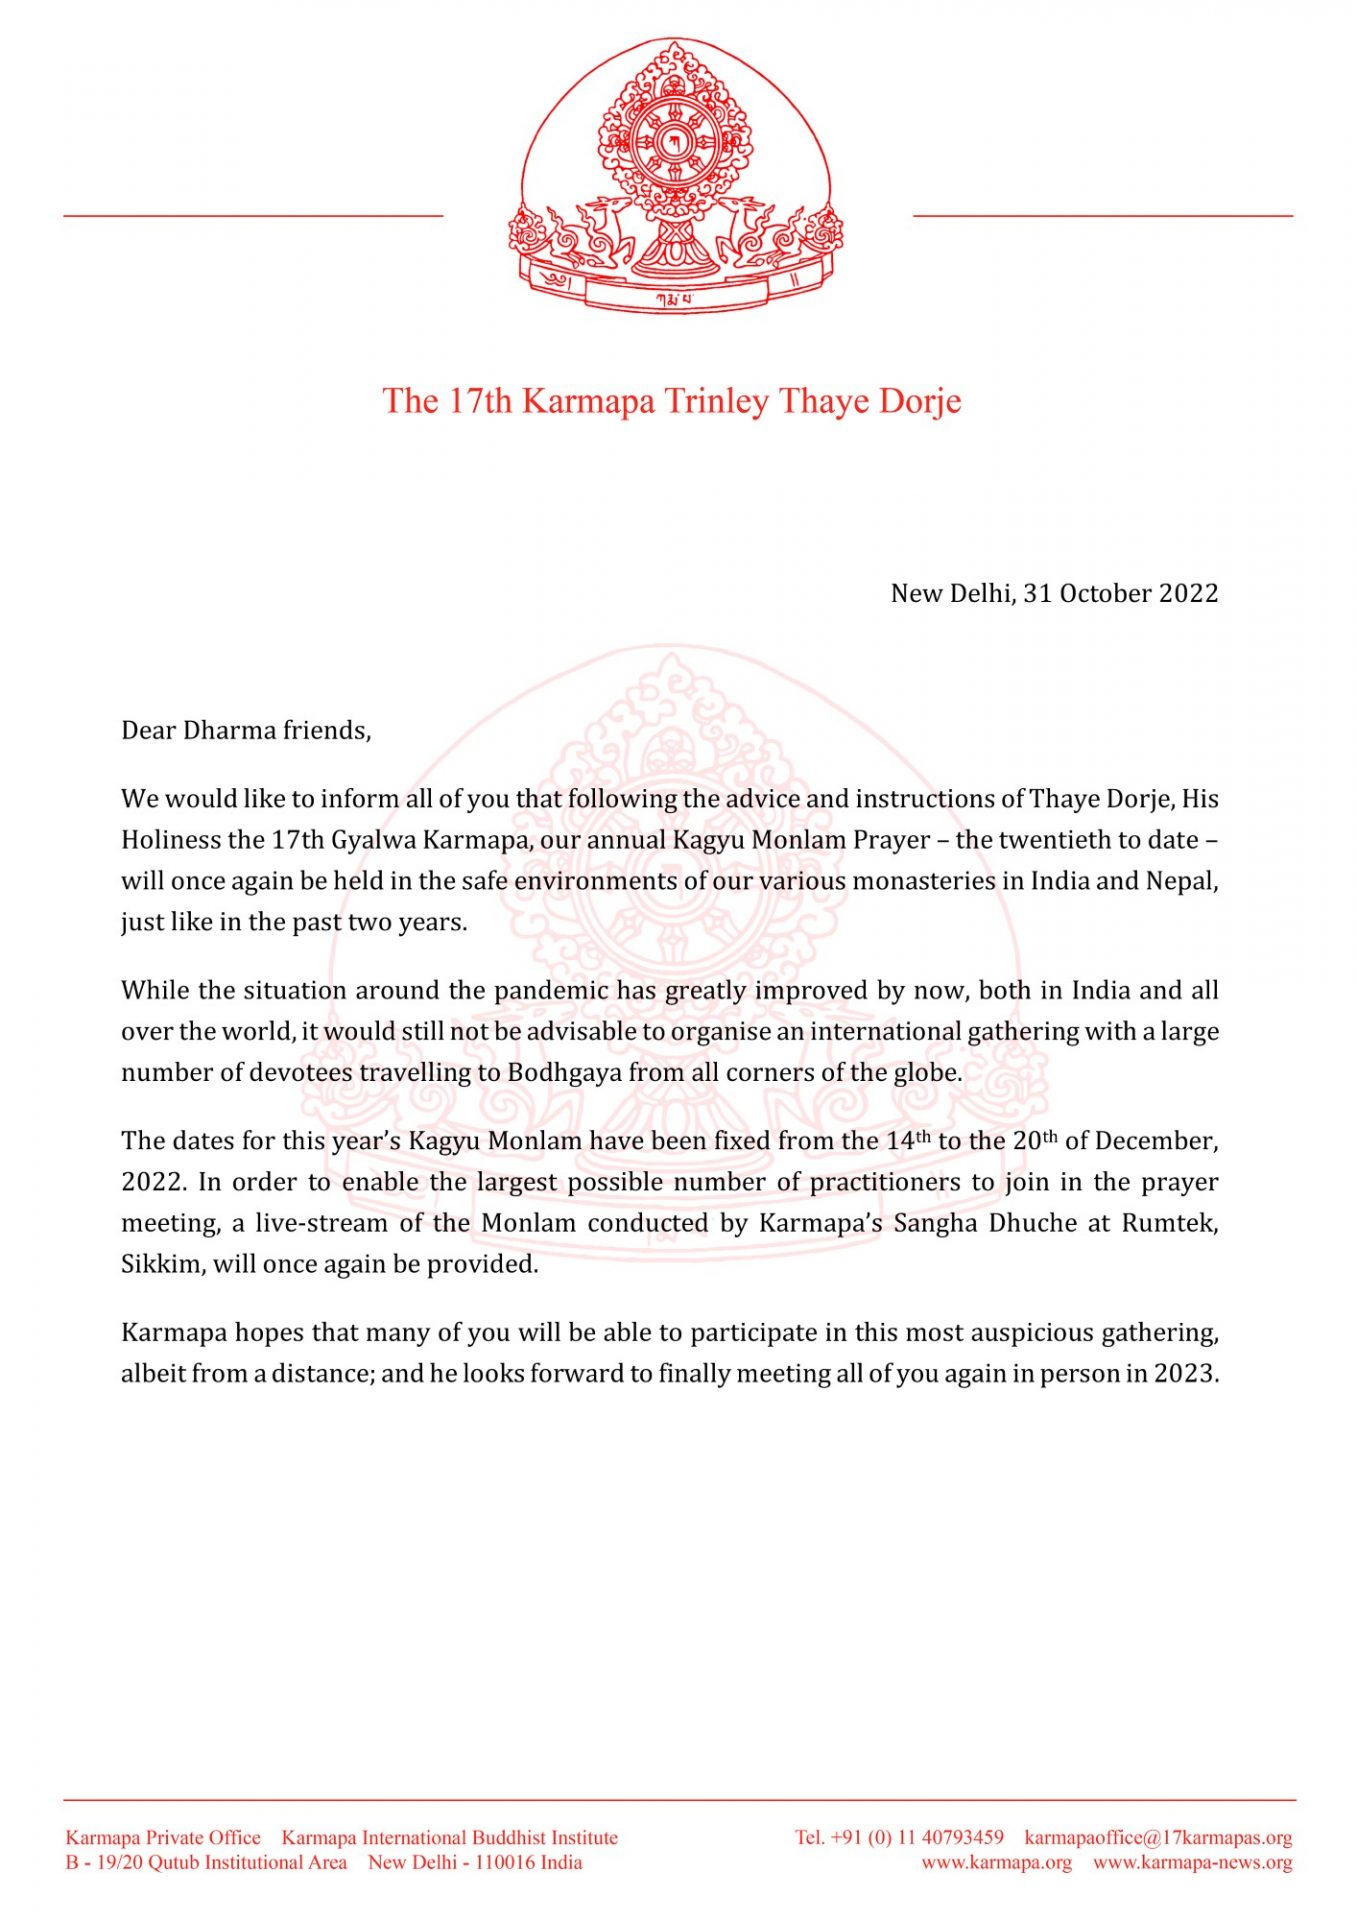 Announcement of the Kagyu Monlam 2022 in English